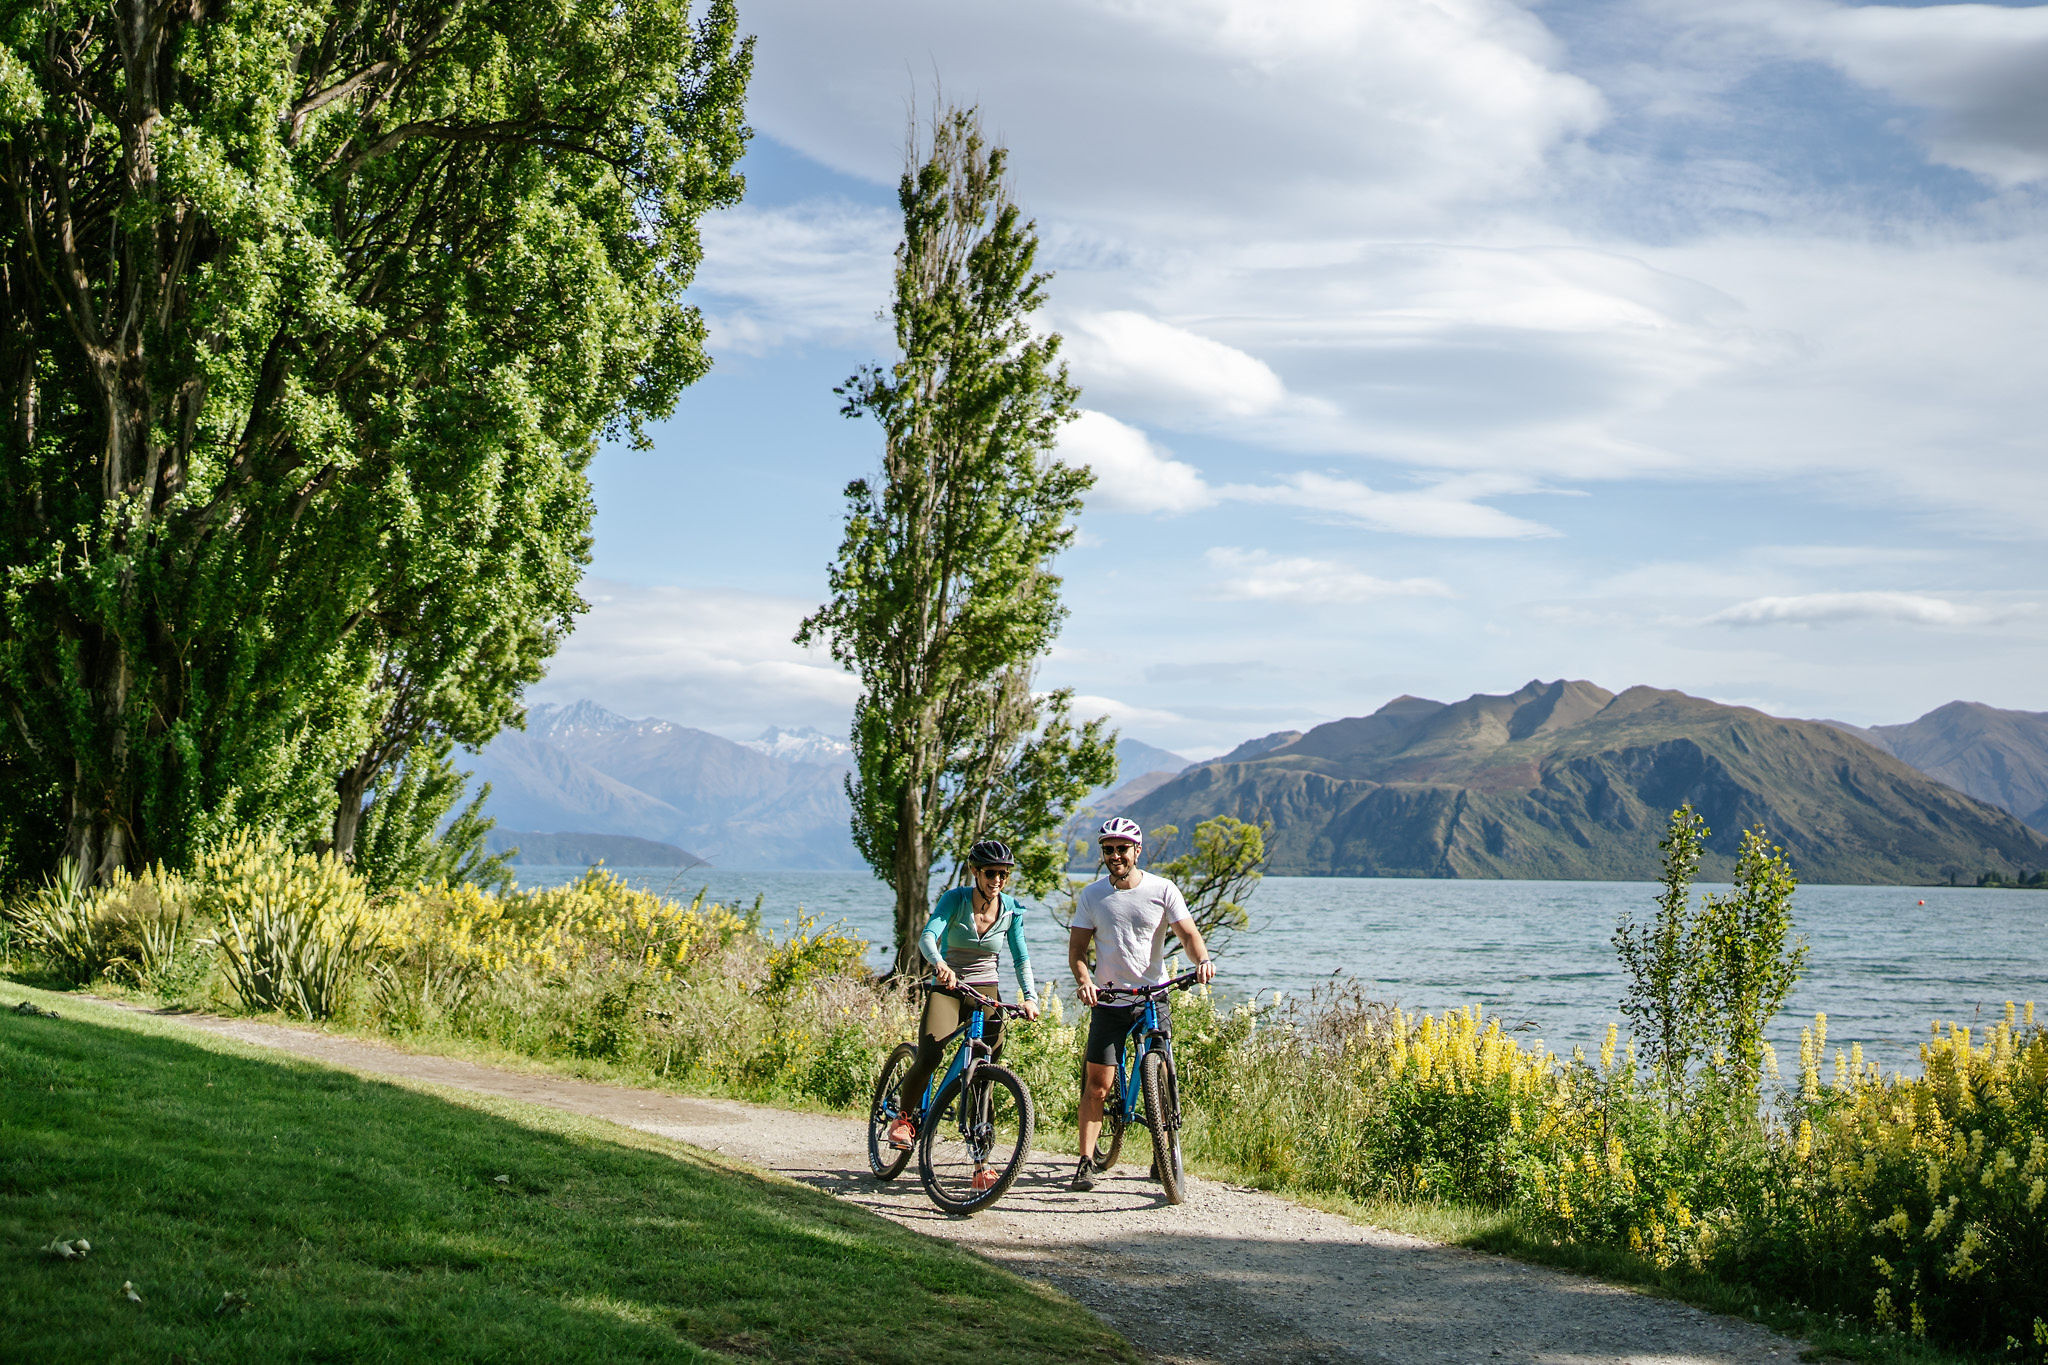 Bike along the trail from the hotel into Wanaka Central a few minutes away.